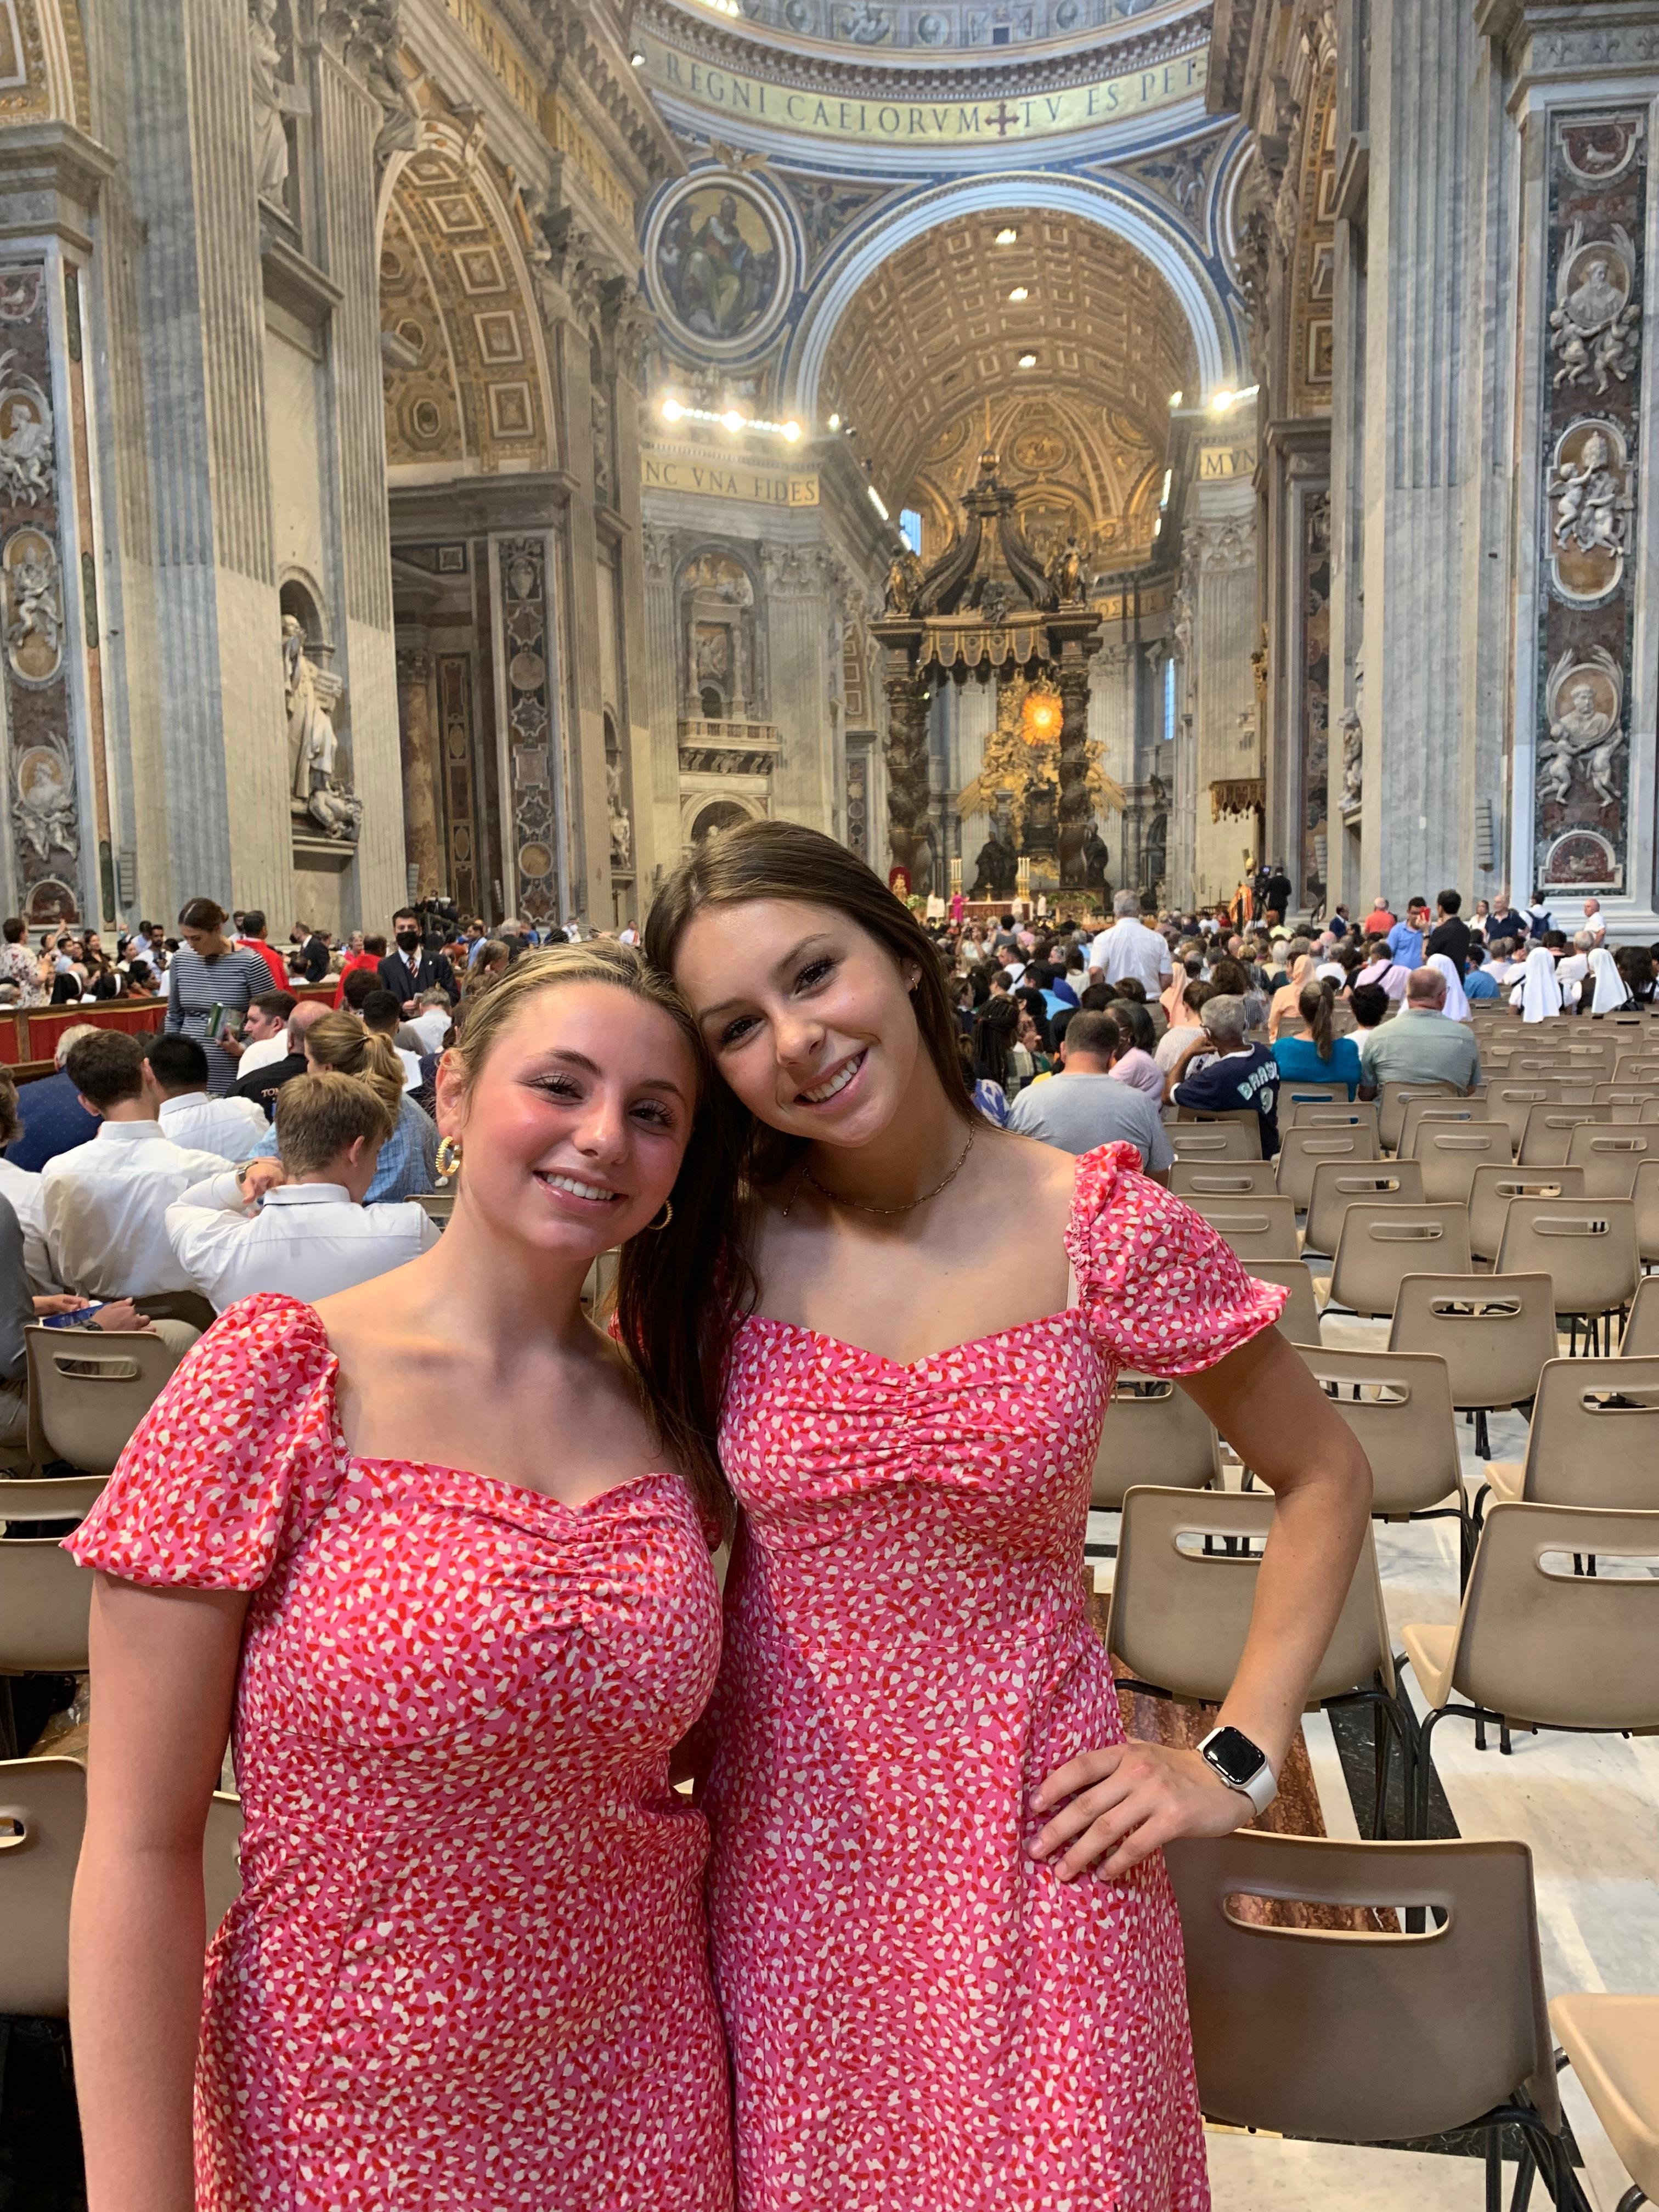 June 29, 2022: Matching Dresses for the Holy Father!!!